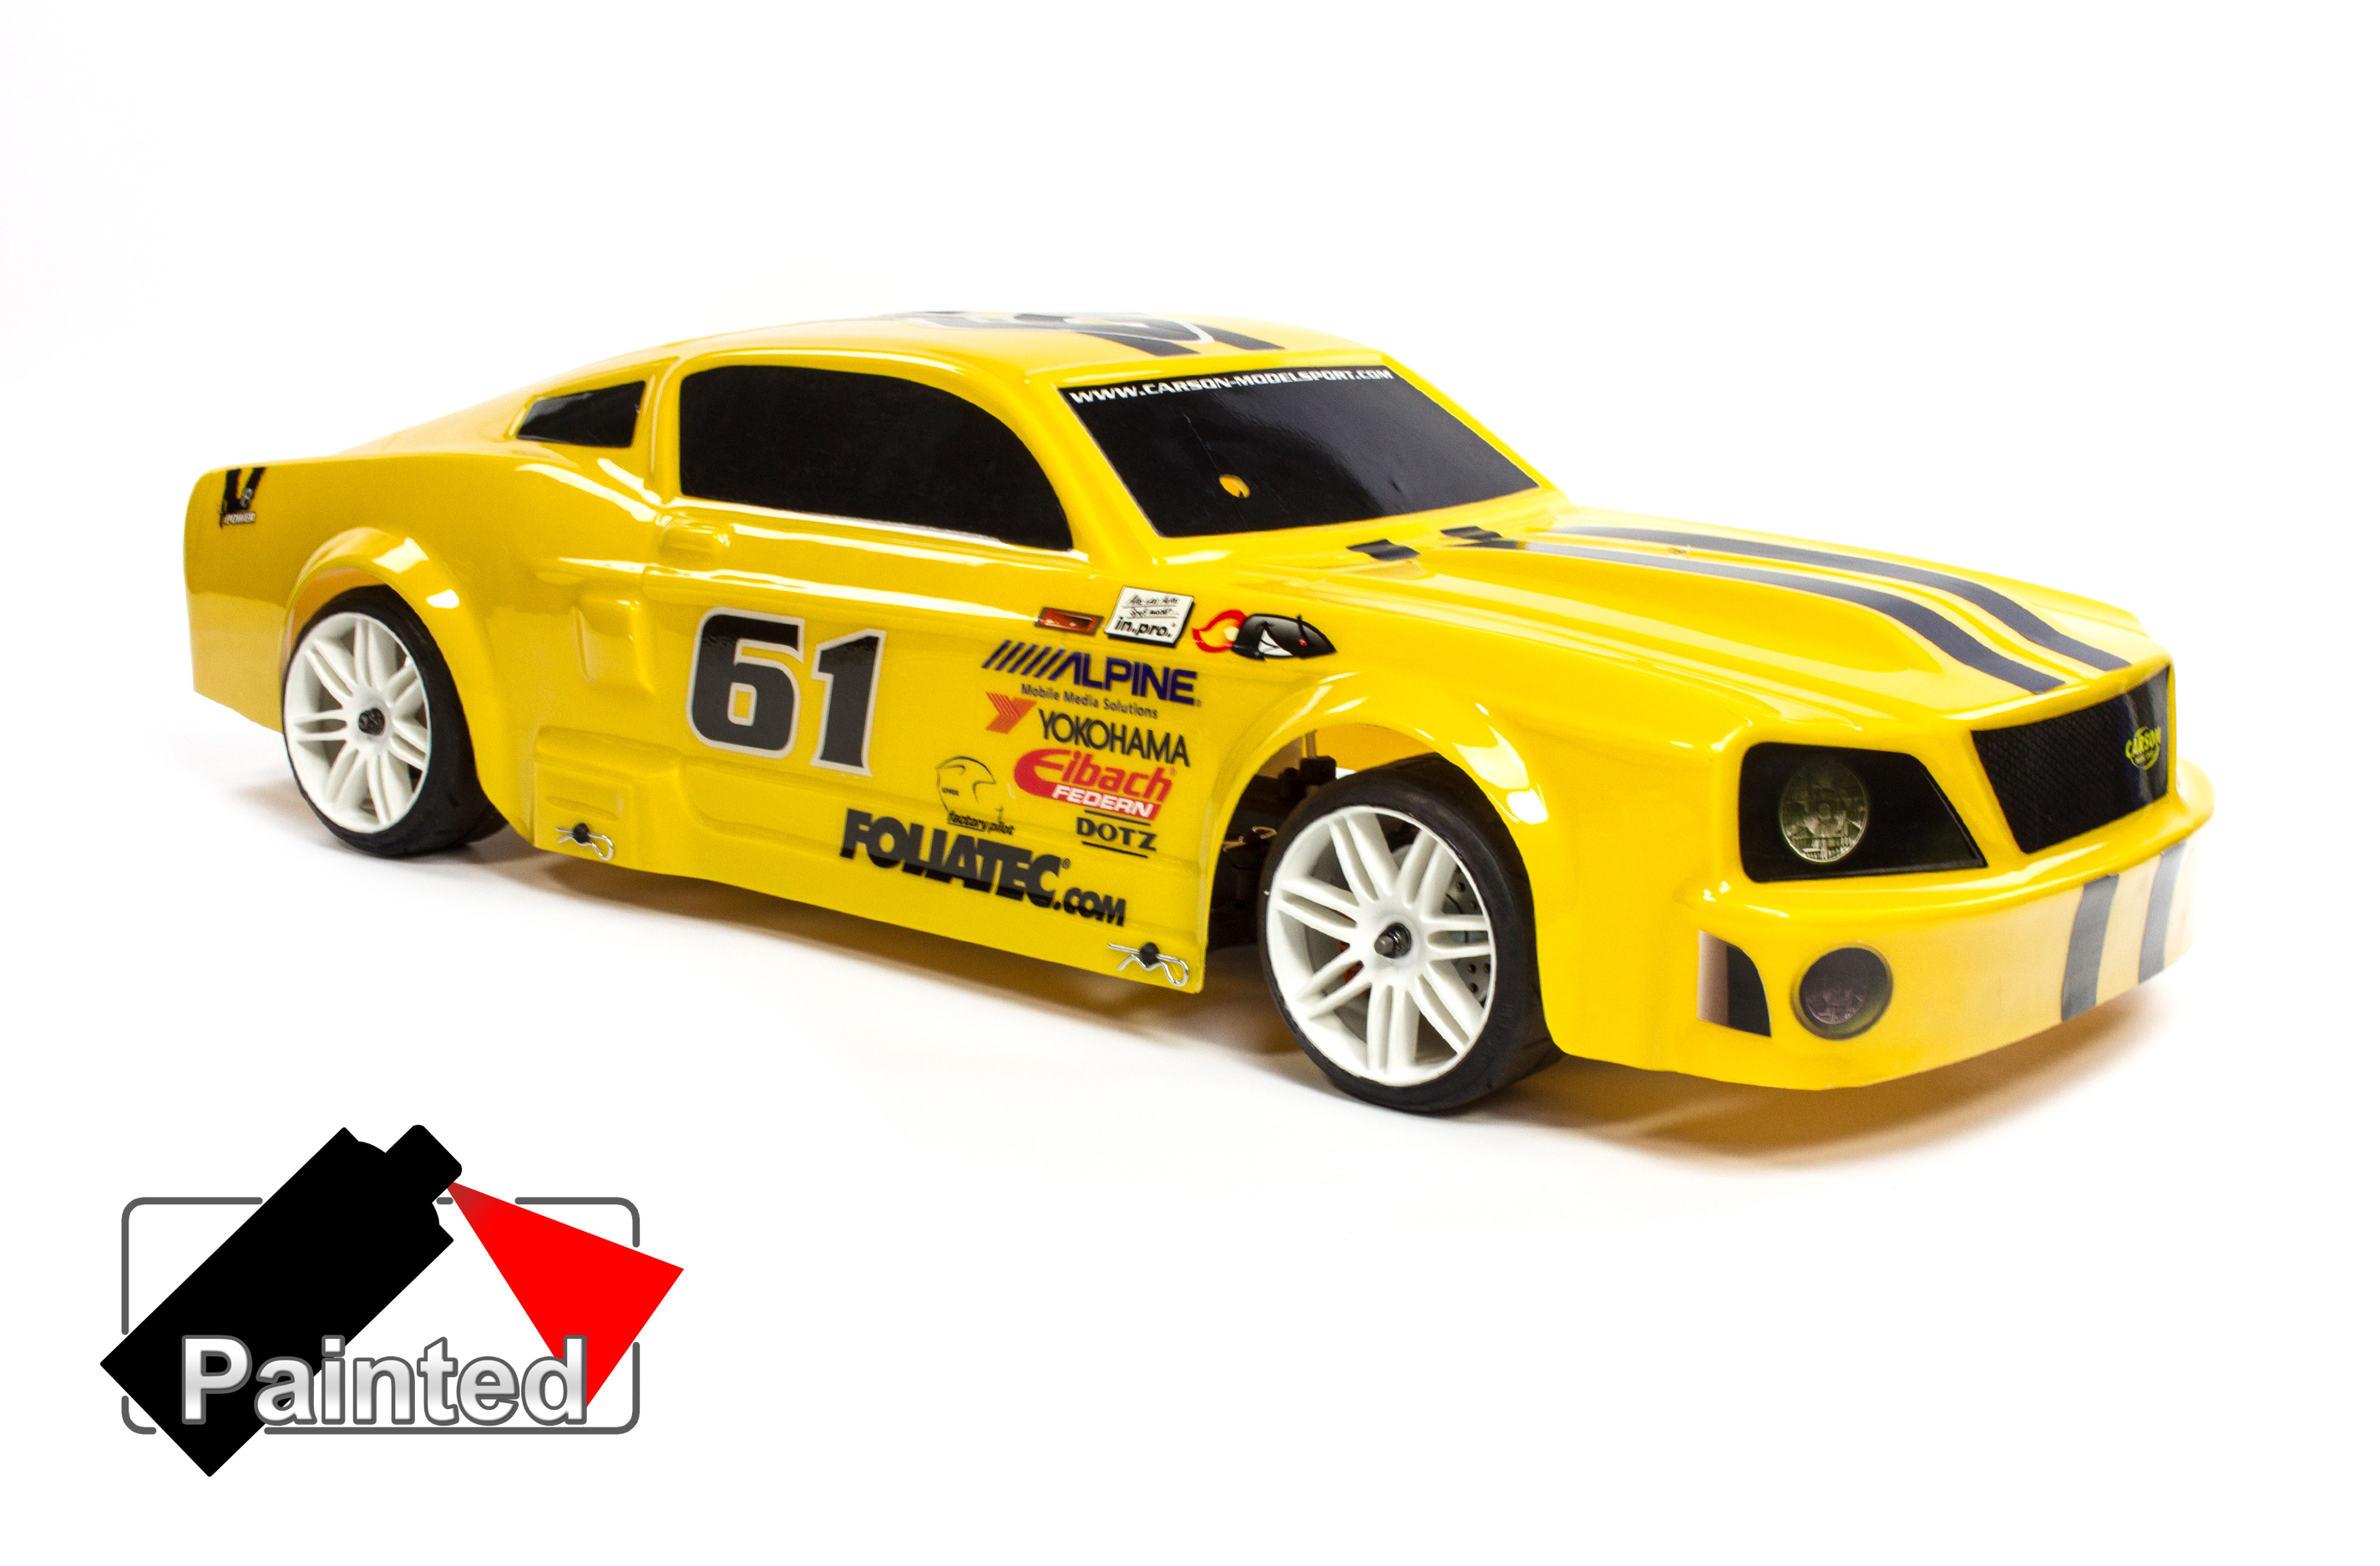 FG Raceline with Ford Mustang body shell